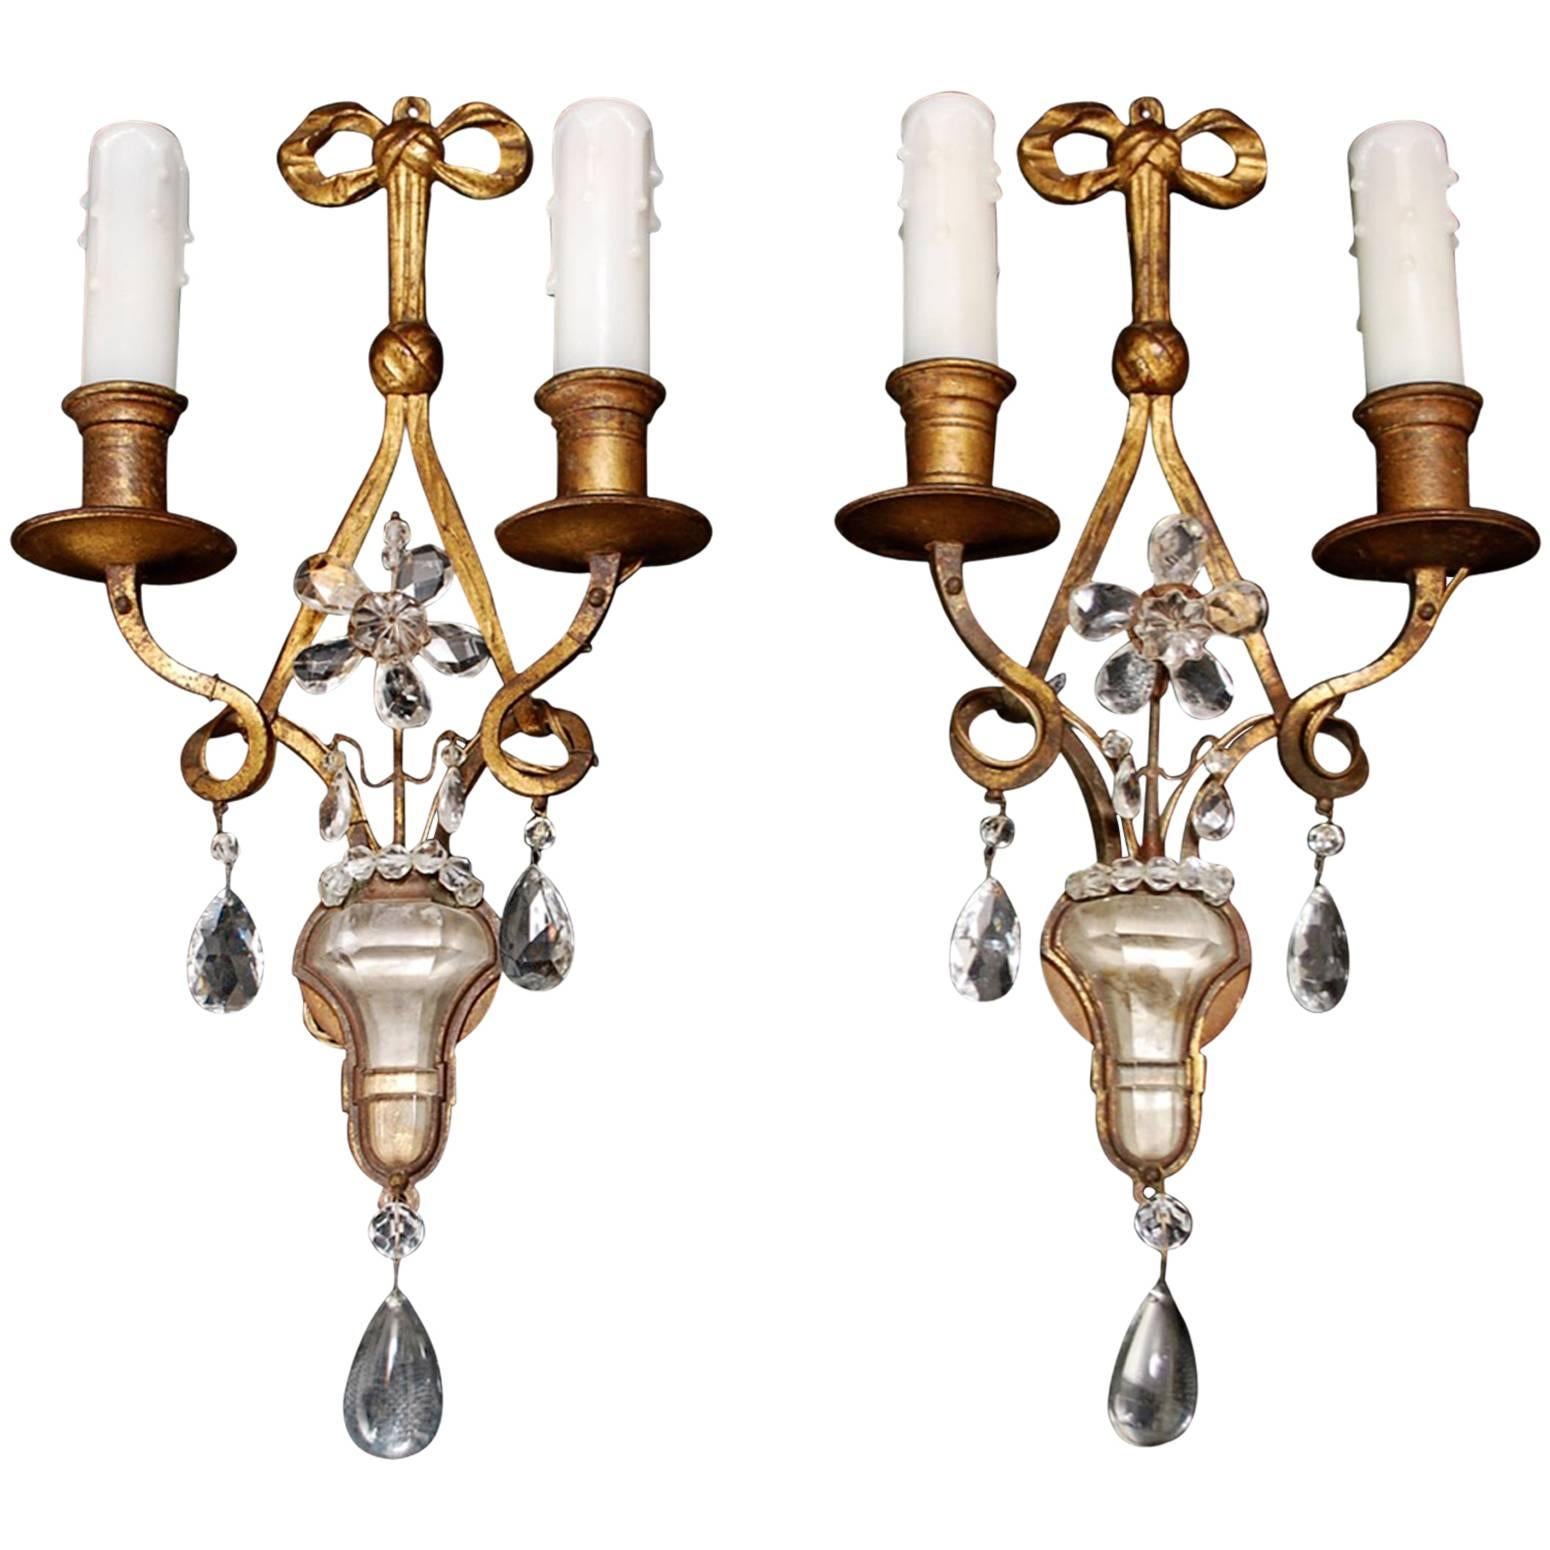 Beautiful Pair of French 1920s Sconces with Rock Crystal by Maison Bagues